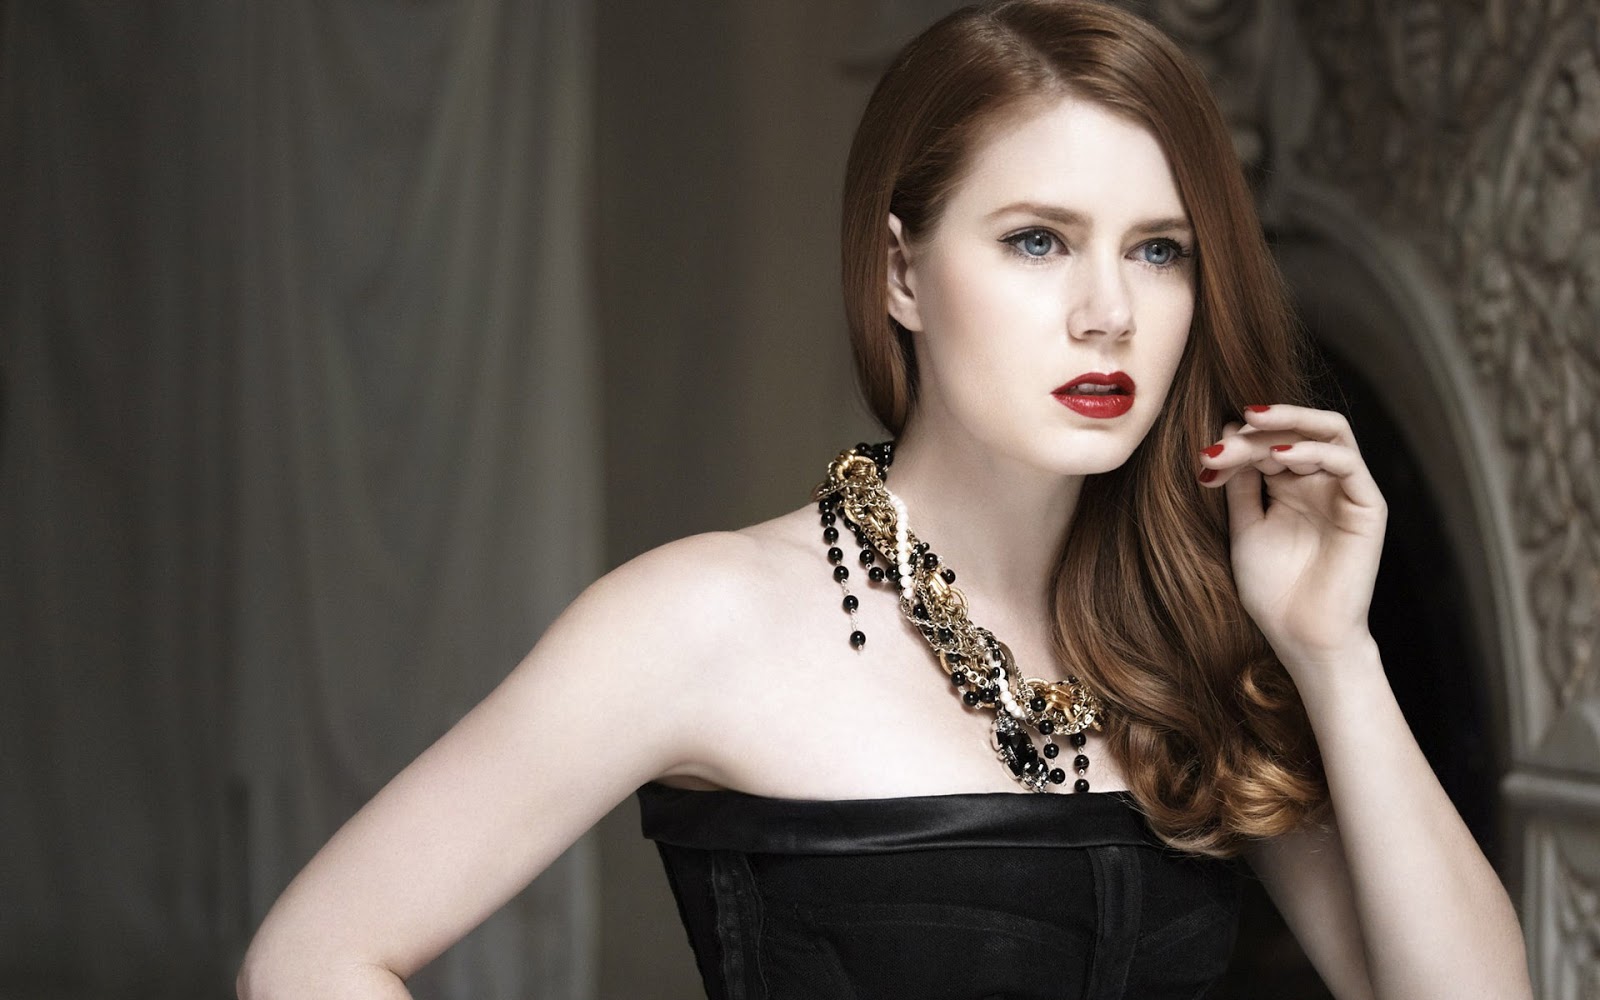 Amy Adams  Upcoming Movies 2016 'Nocturnal Animals' Find on wikipedia, imdb, Facebook, Twitter, Google Plus